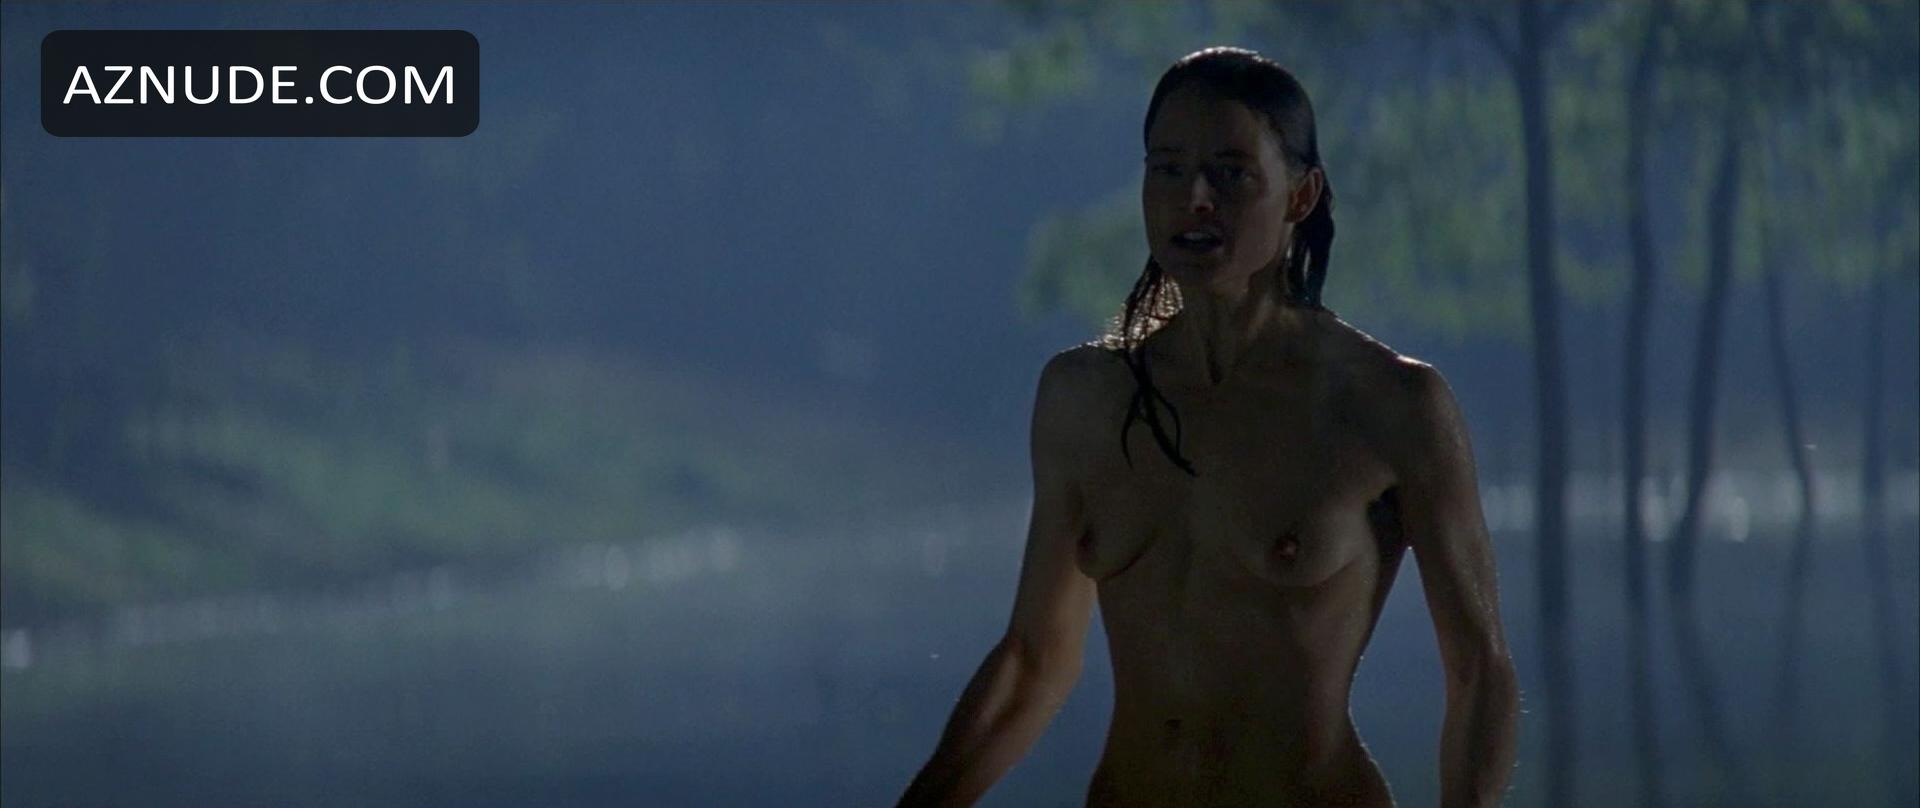 nude Jodie foster girl